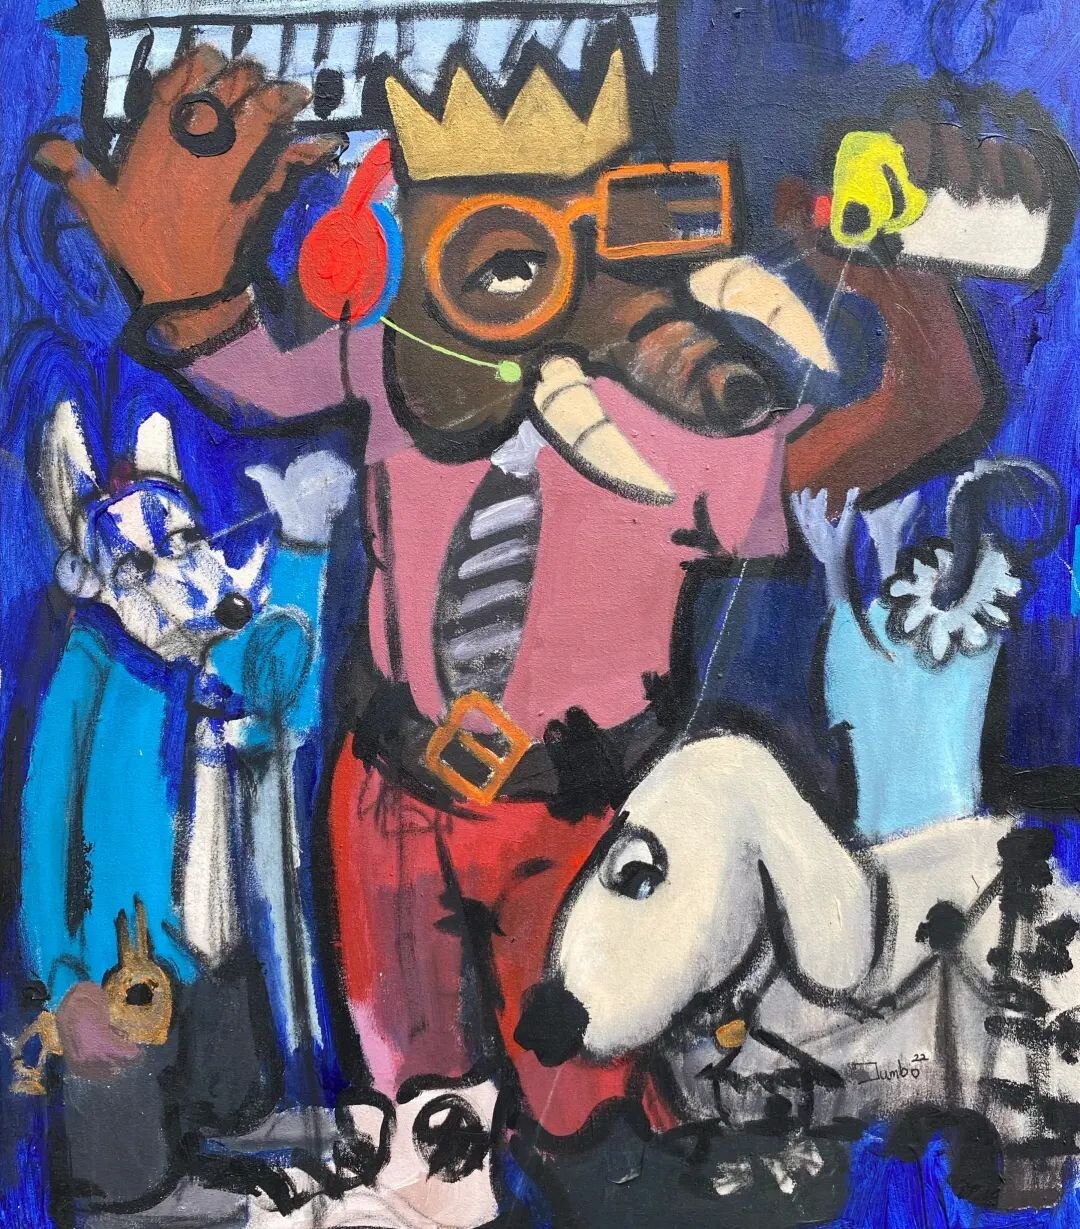 &quot;Elephant in the room&quot; by Sotonye Jumbo @sotyj exhibited at the Small and Iconic , The Artssembly Edition.  Among a gathering of stars, there is always one that shines brighter and demands attention. 

Medium: Acrylics on canvas

Dimension: